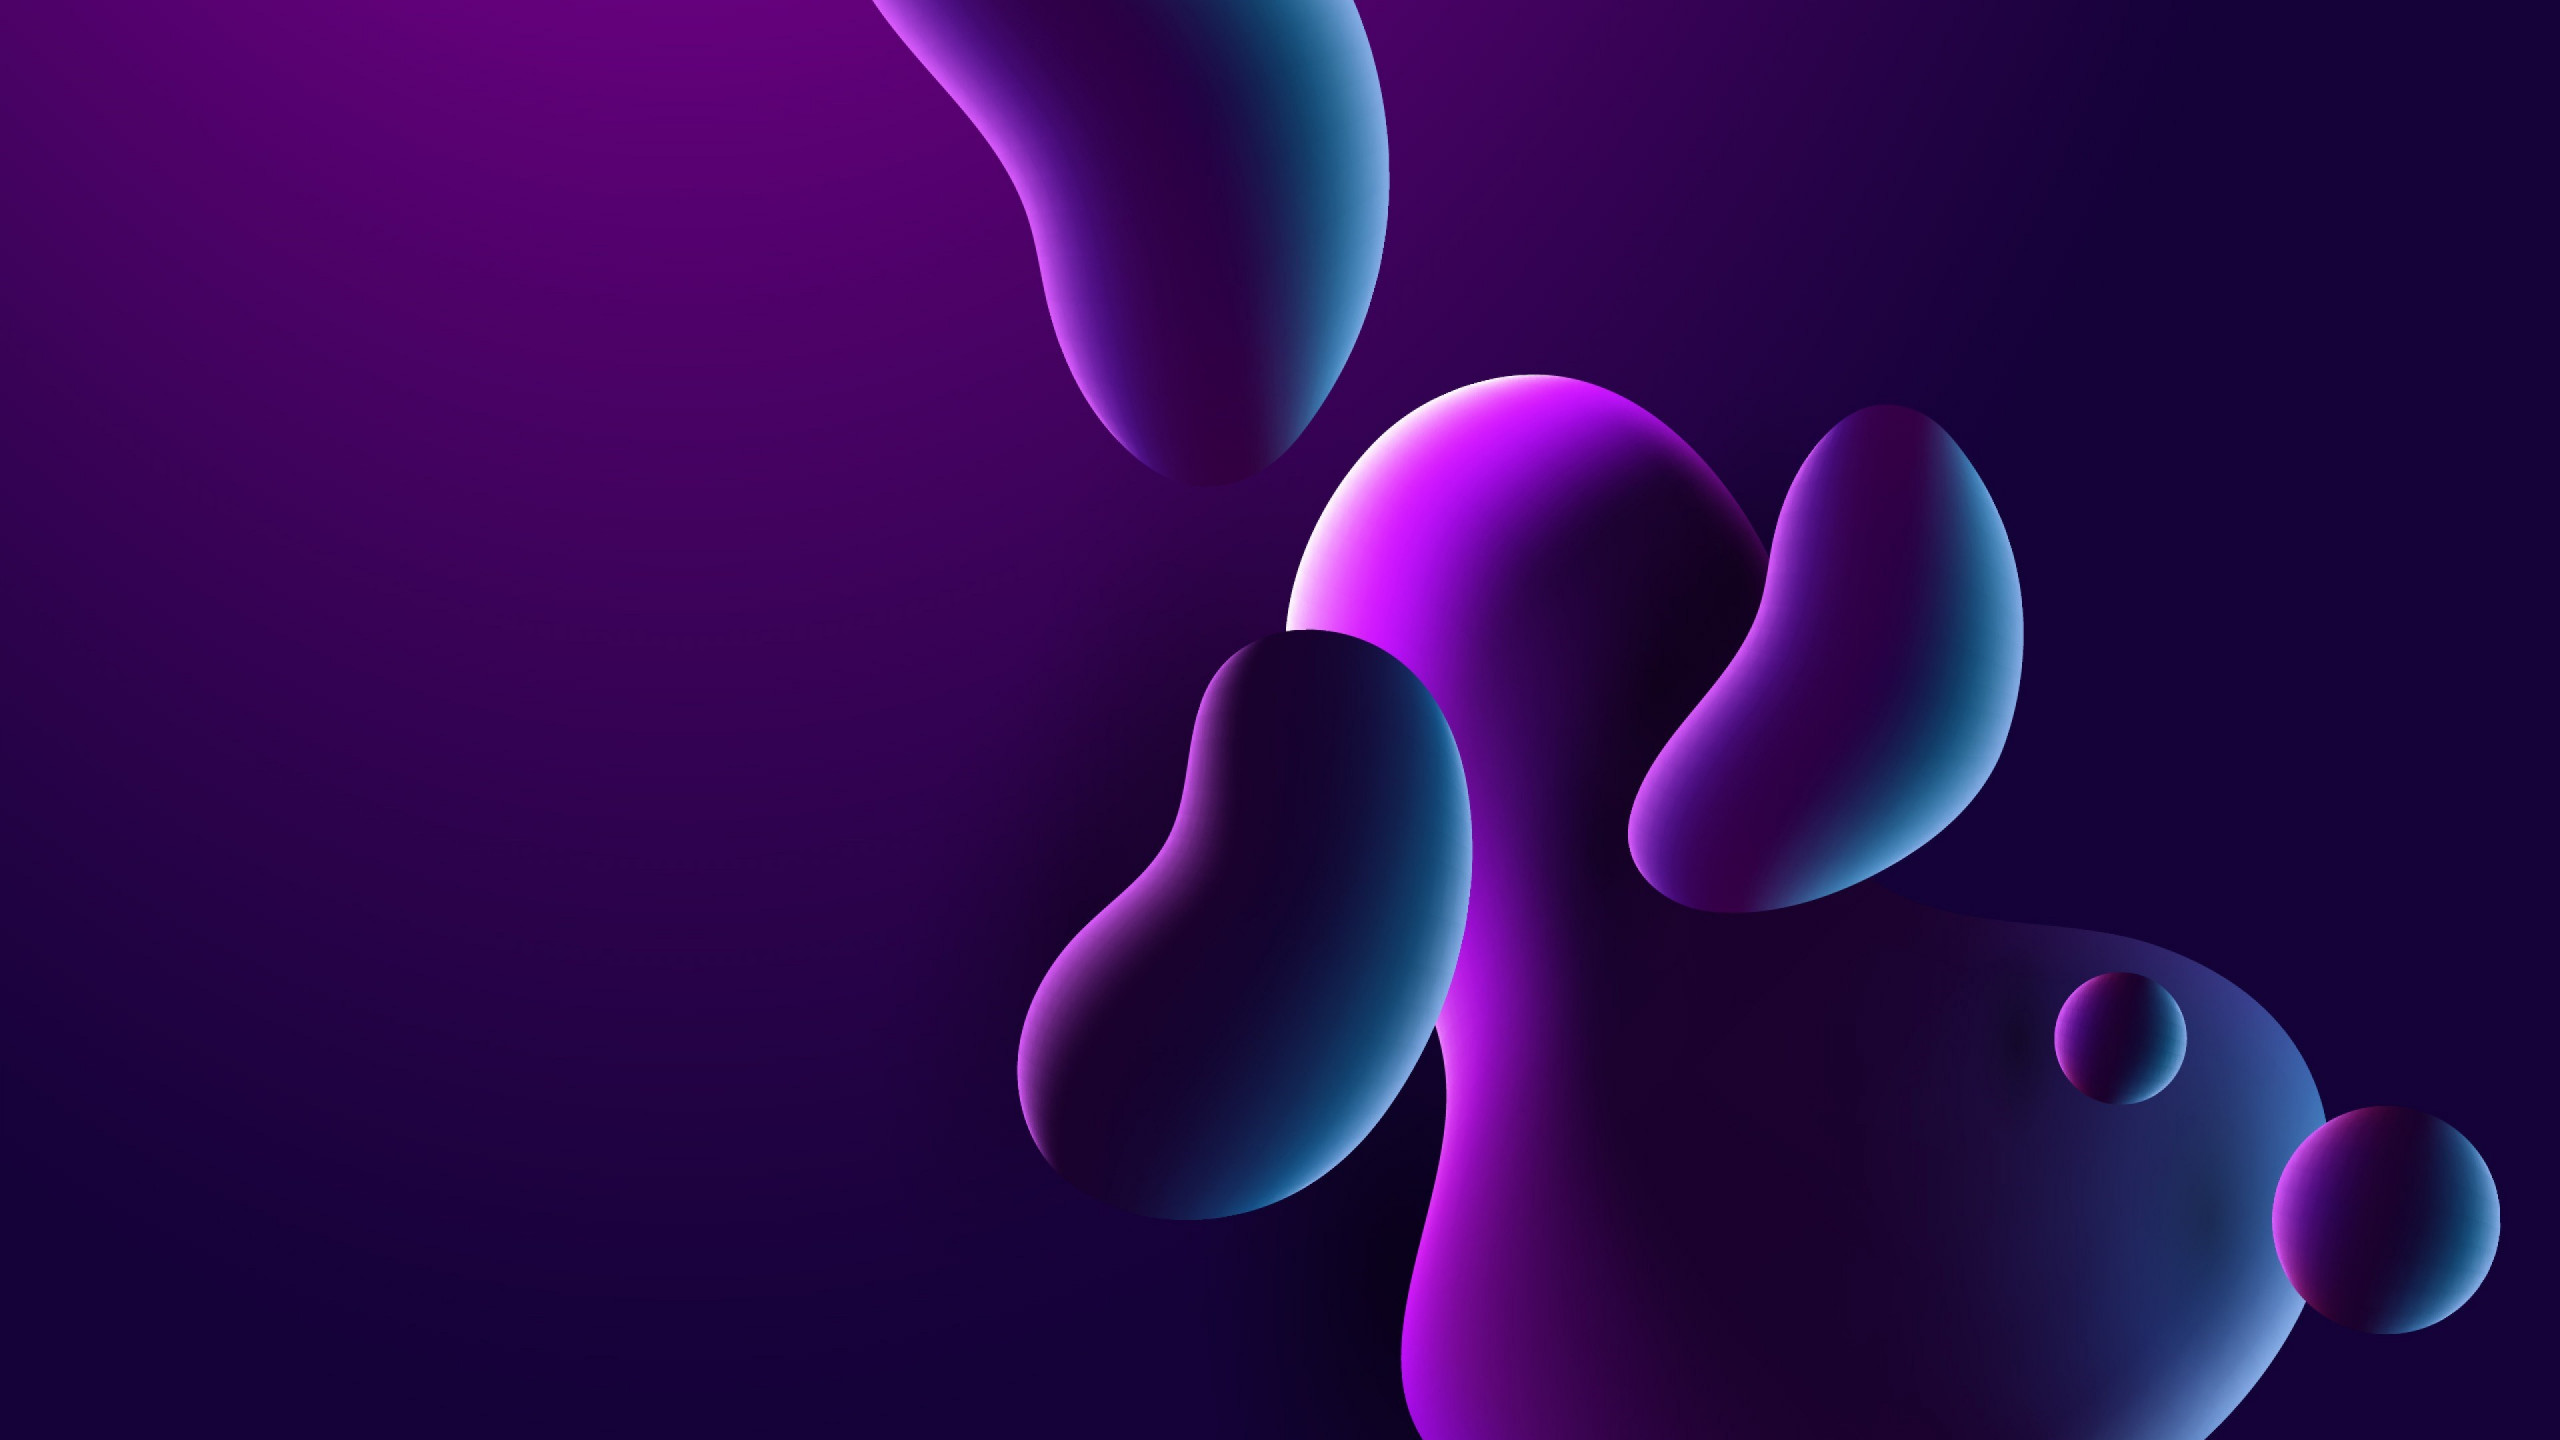 OnePlus 7T Pro, stock, bubble, abstract wallpaper 2560x1440